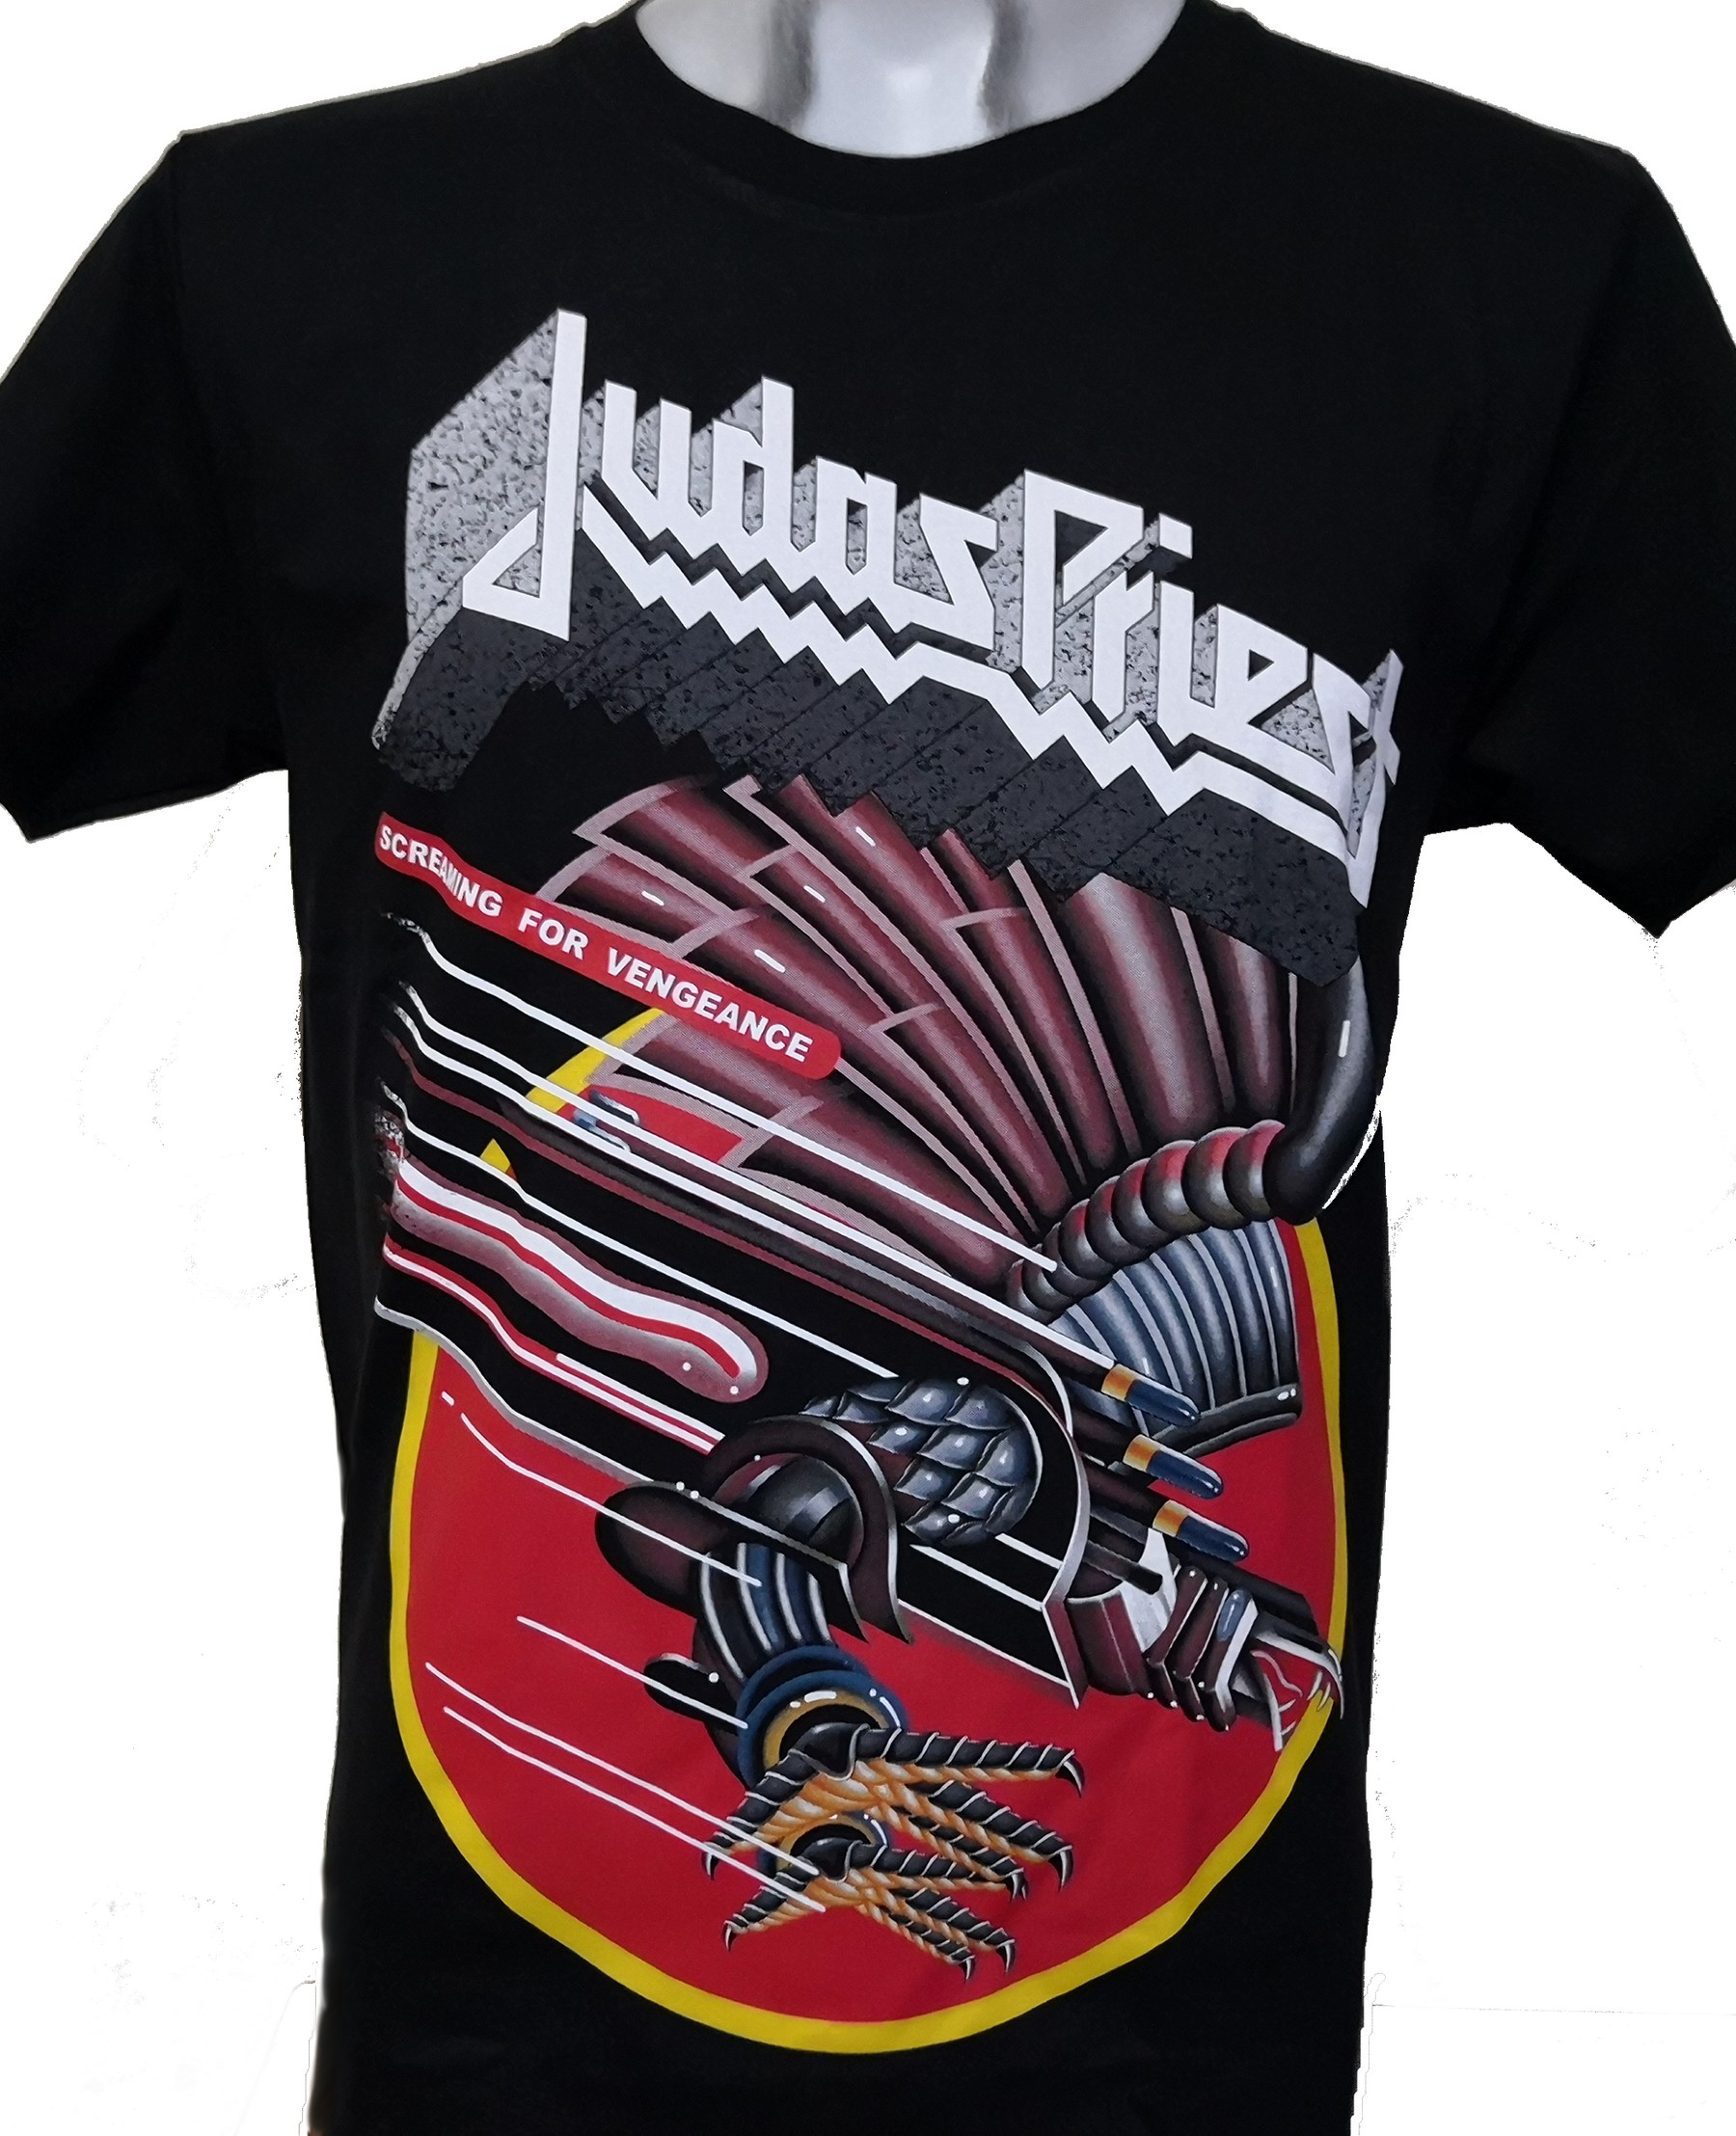 NEW & OFFICIAL! Judas Priest 'Screaming For Vengeance' T-Shirt